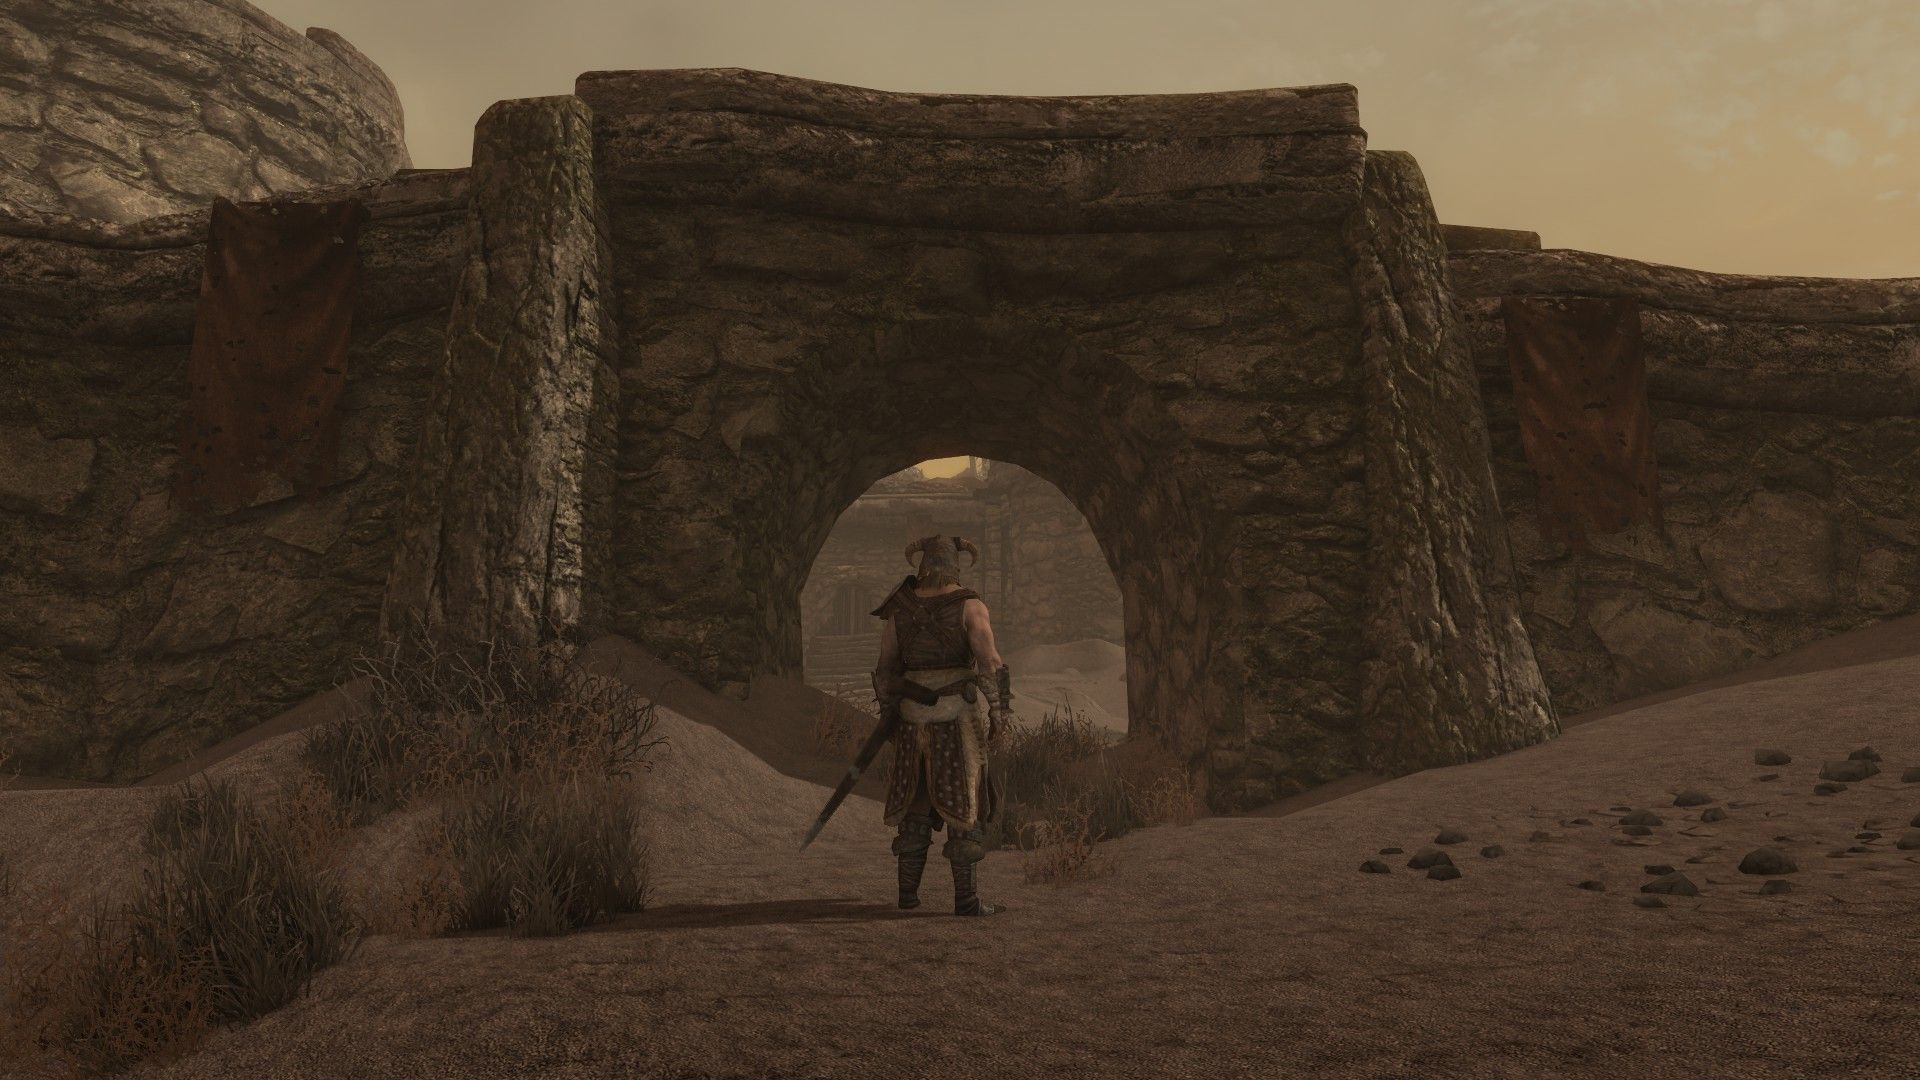 An armed and armored man stands at the entrance of a battered and crumbling palace surrounded by deep ashes.